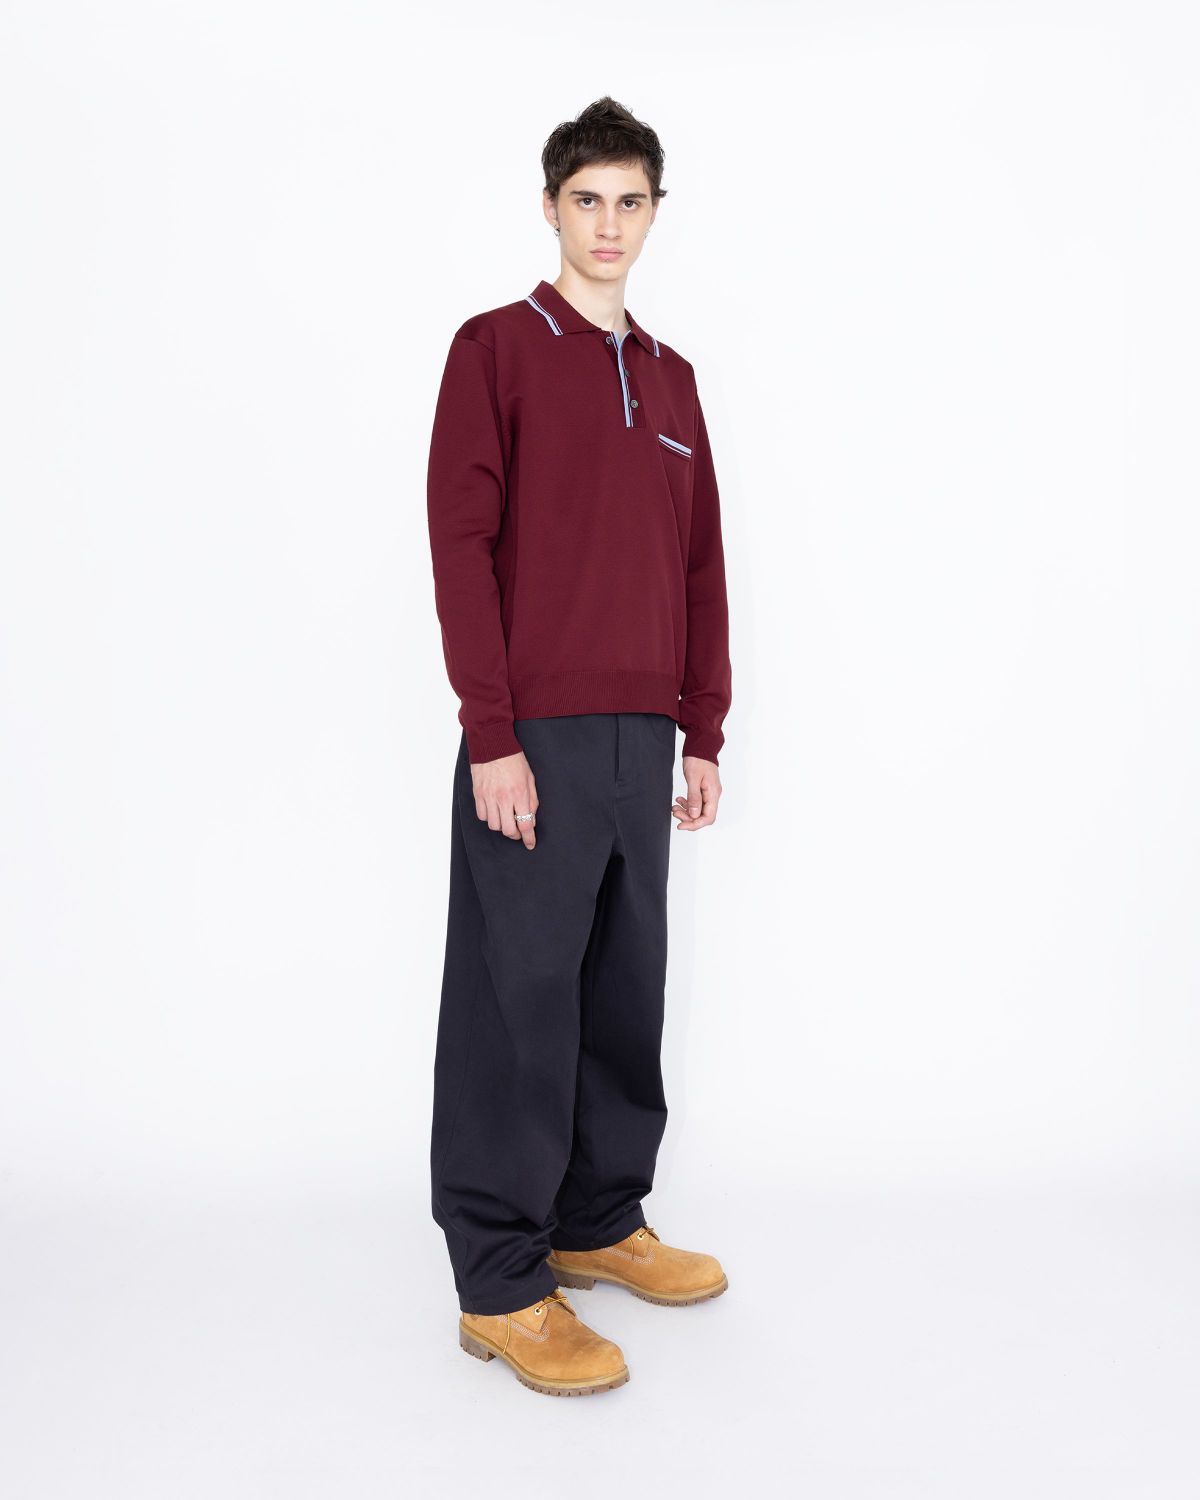 Highsnobiety HS05 – Long Sleeves Knit Polo Bordeaux - Longsleeves - Red - Image 4